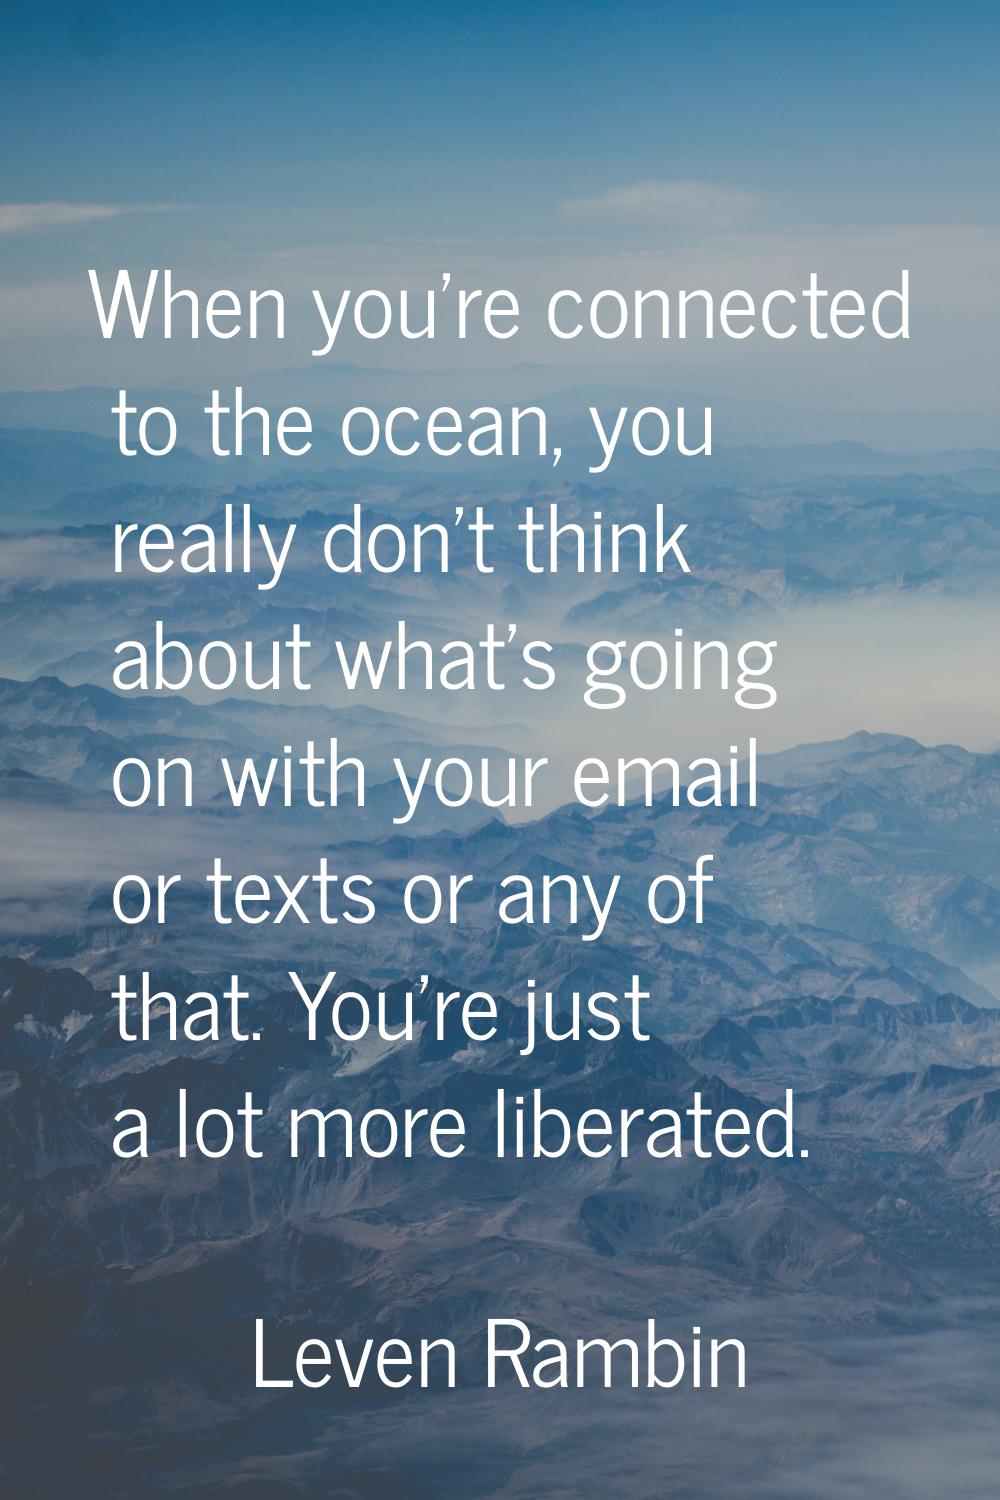 When you're connected to the ocean, you really don't think about what's going on with your email or